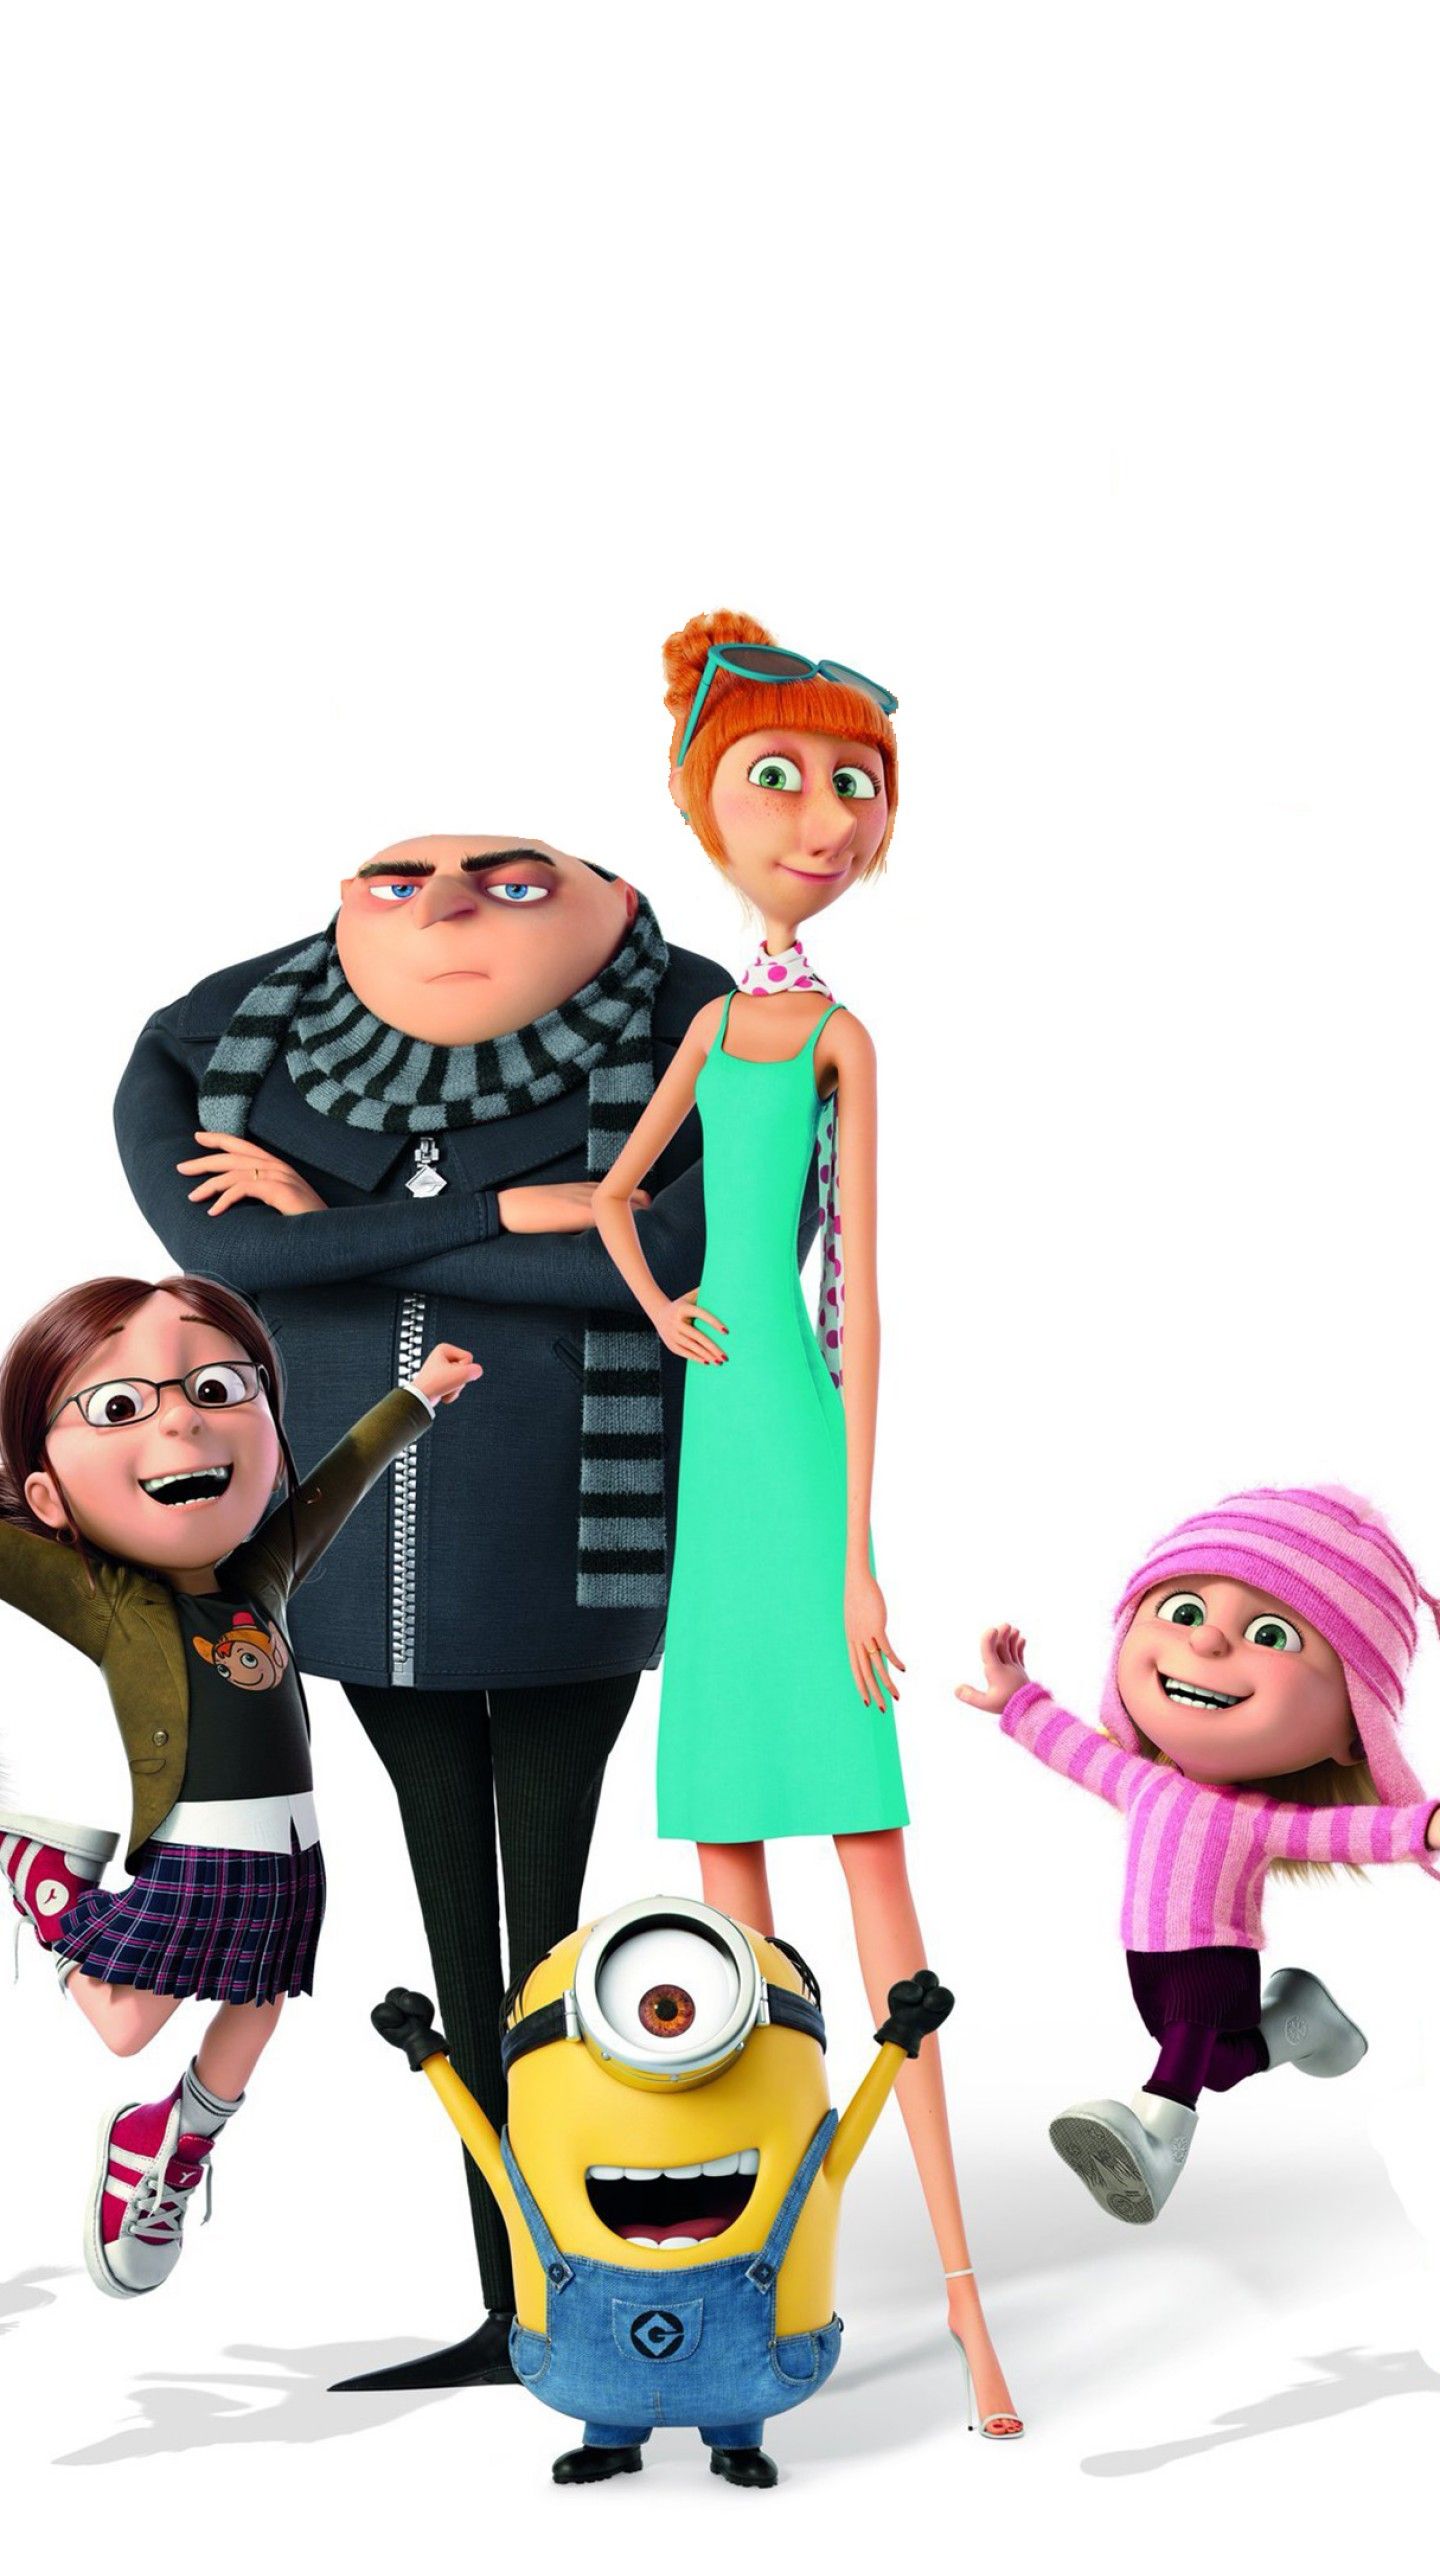 Wallpaper Despicable Me Gru, Margo, Agnes, Edith, Lucy Wilde, Minions, 4K, Movies / Editor's Picks,. Wallpaper for iPhone, Android, Mobile and Desktop